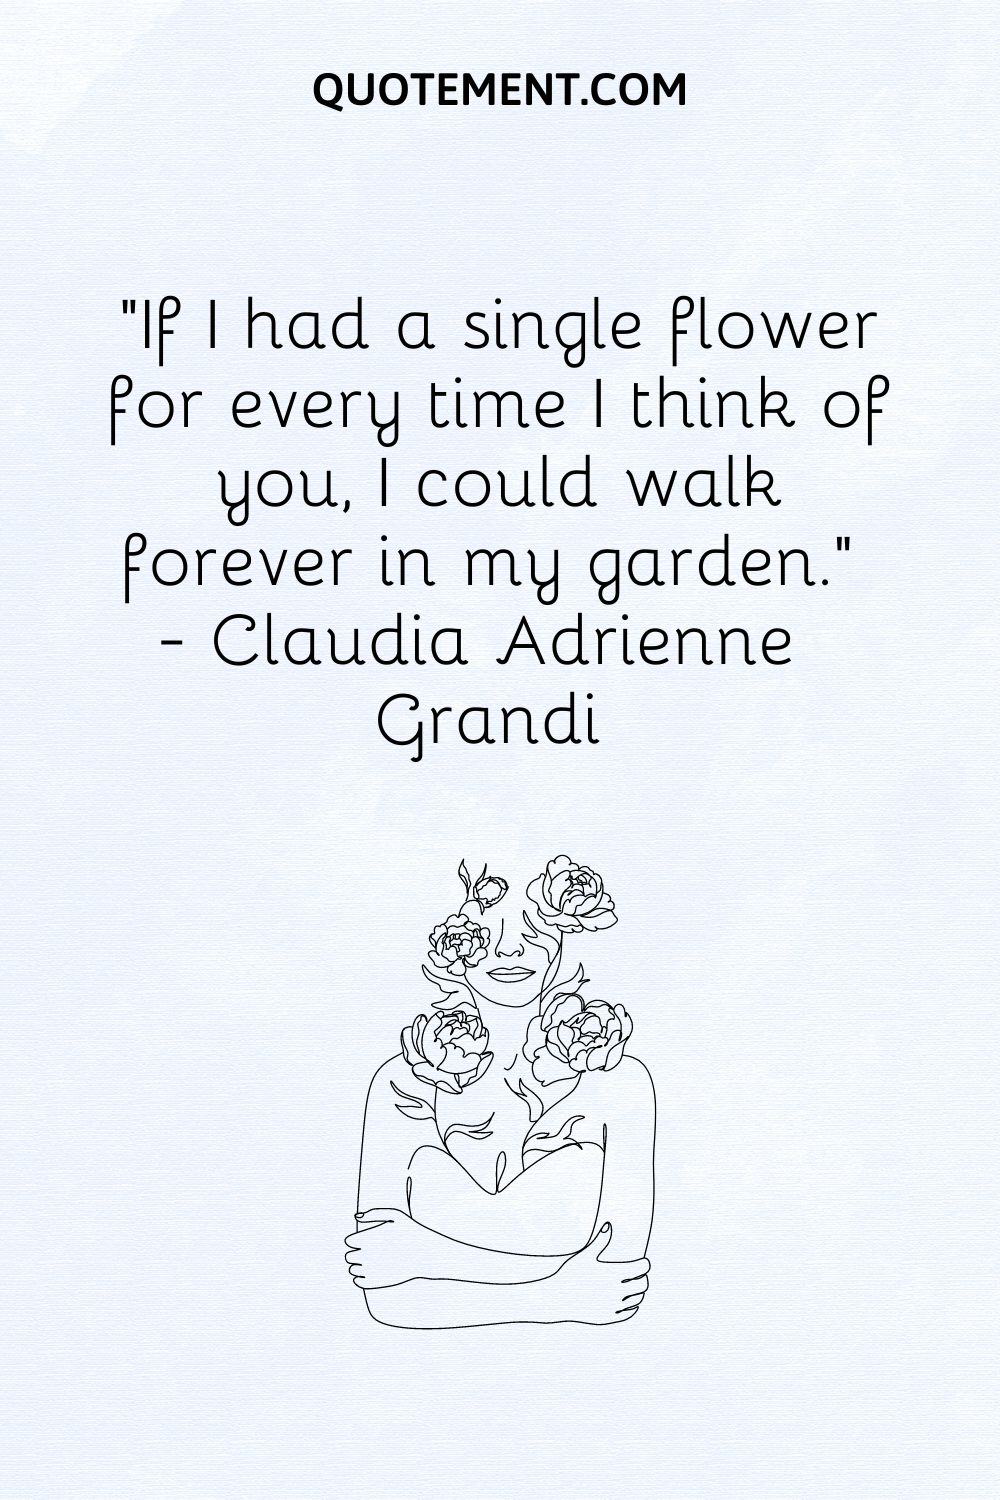 If I had a single flower for every time I think of you, I could walk forever in my garden